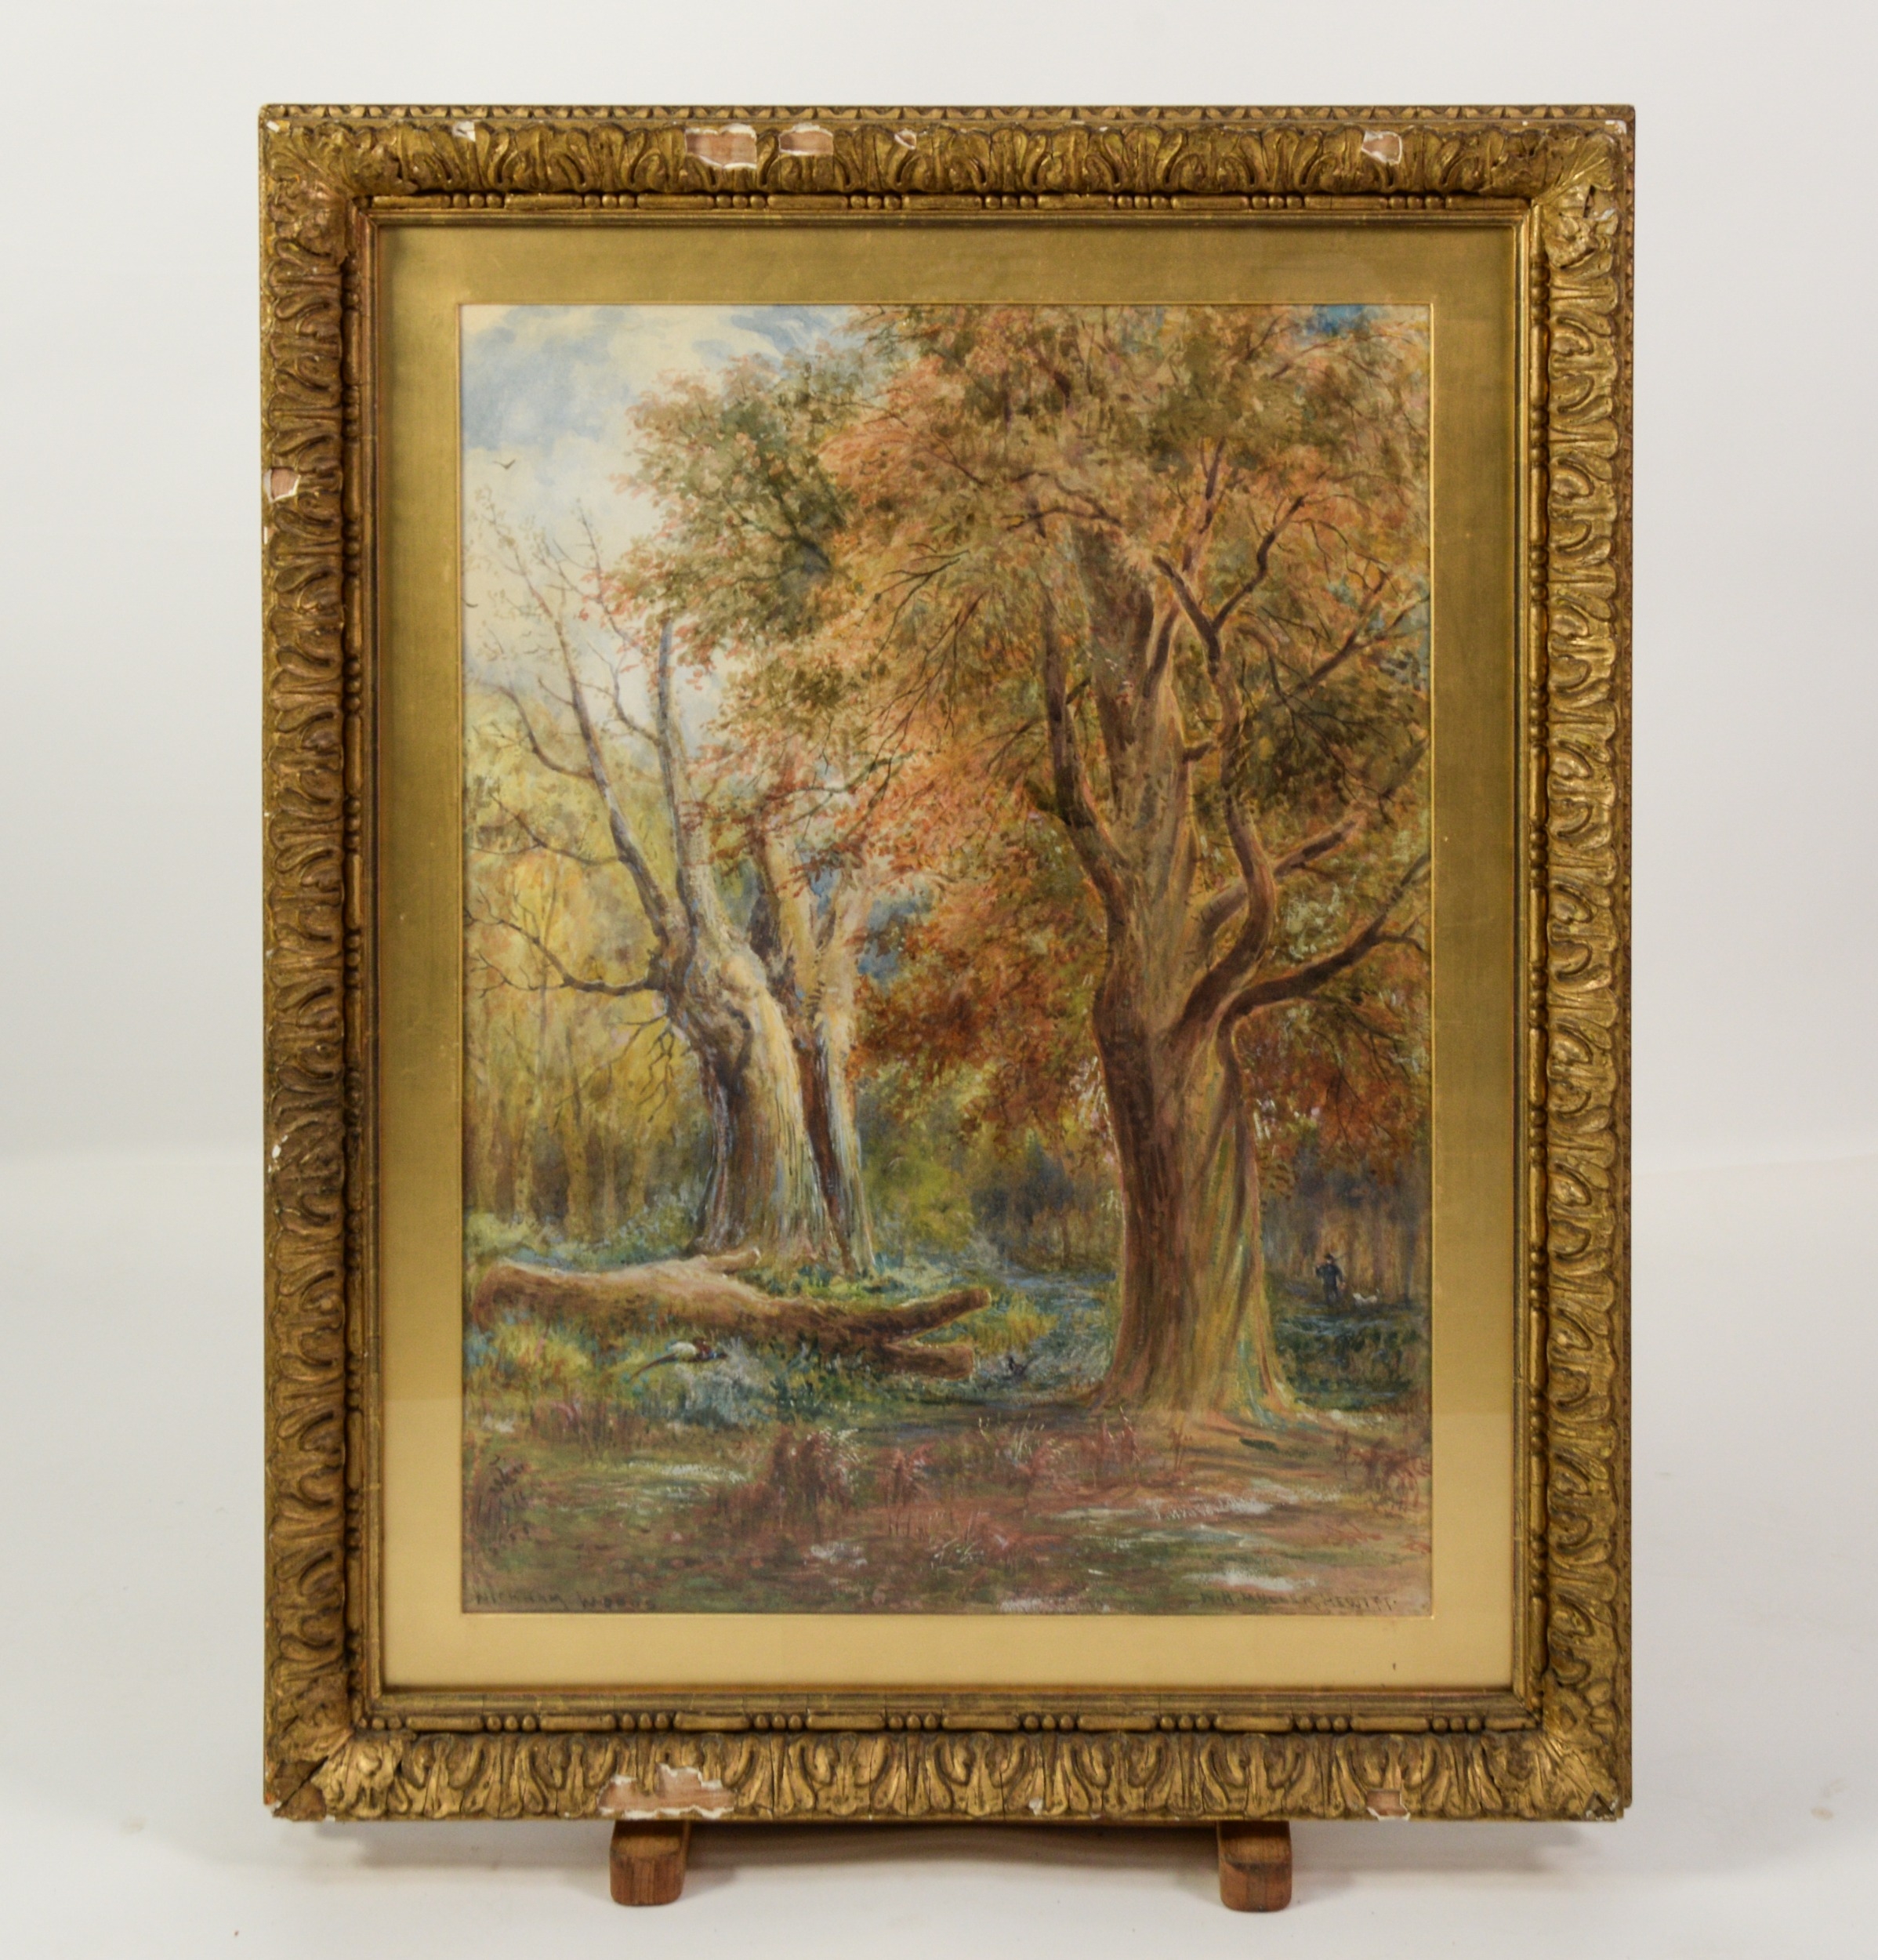 WILLIAM H. MULLER-HEWITT (19th/20th century) WATERCOLOUR & CRAYON 'Wickham Woods' signed lower right - Image 2 of 2